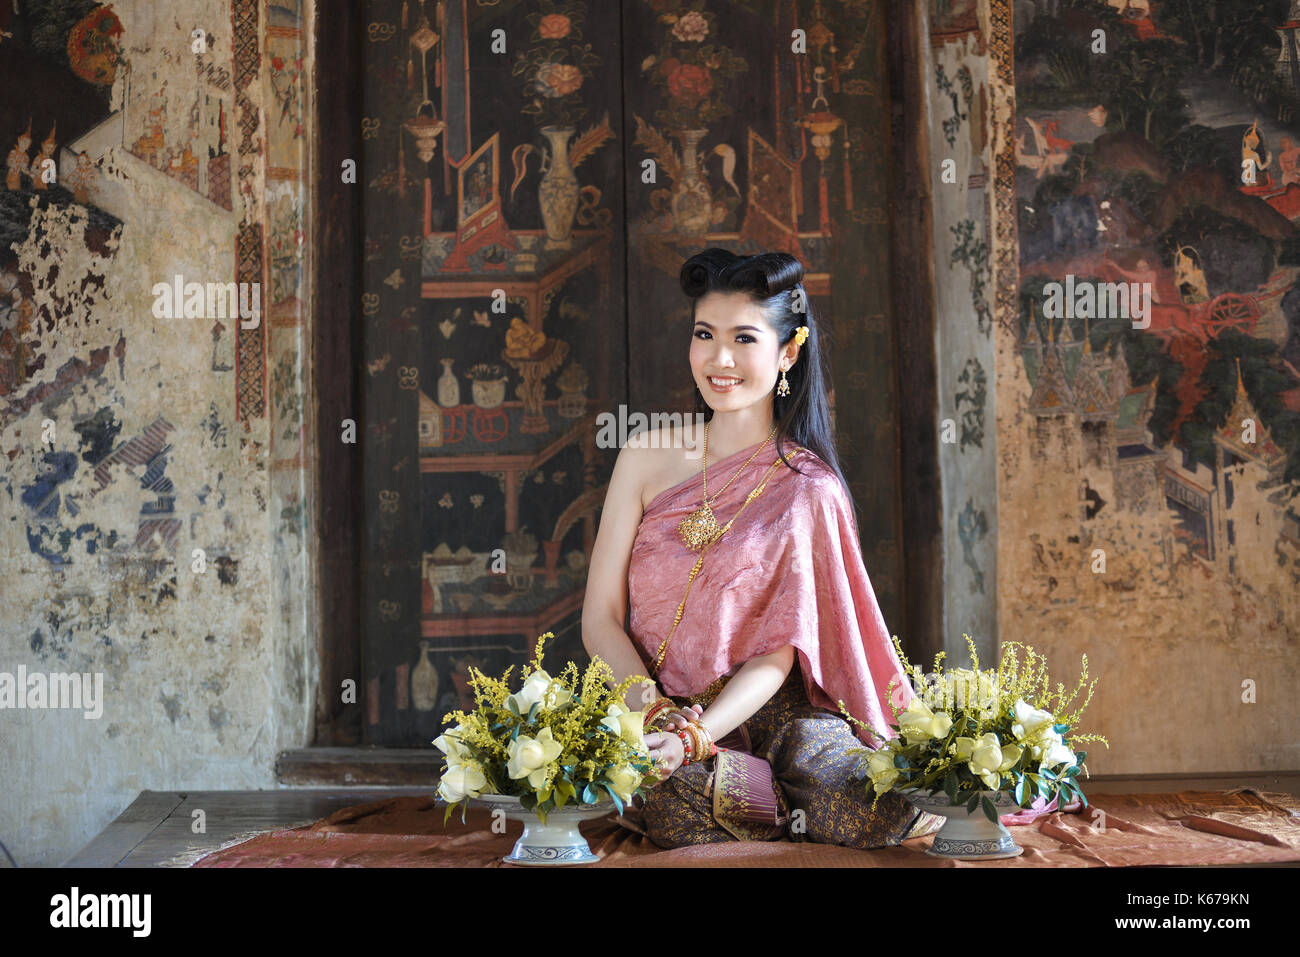 Portrait of a smiling woman in traditional clothing, Thailand Stock Photo